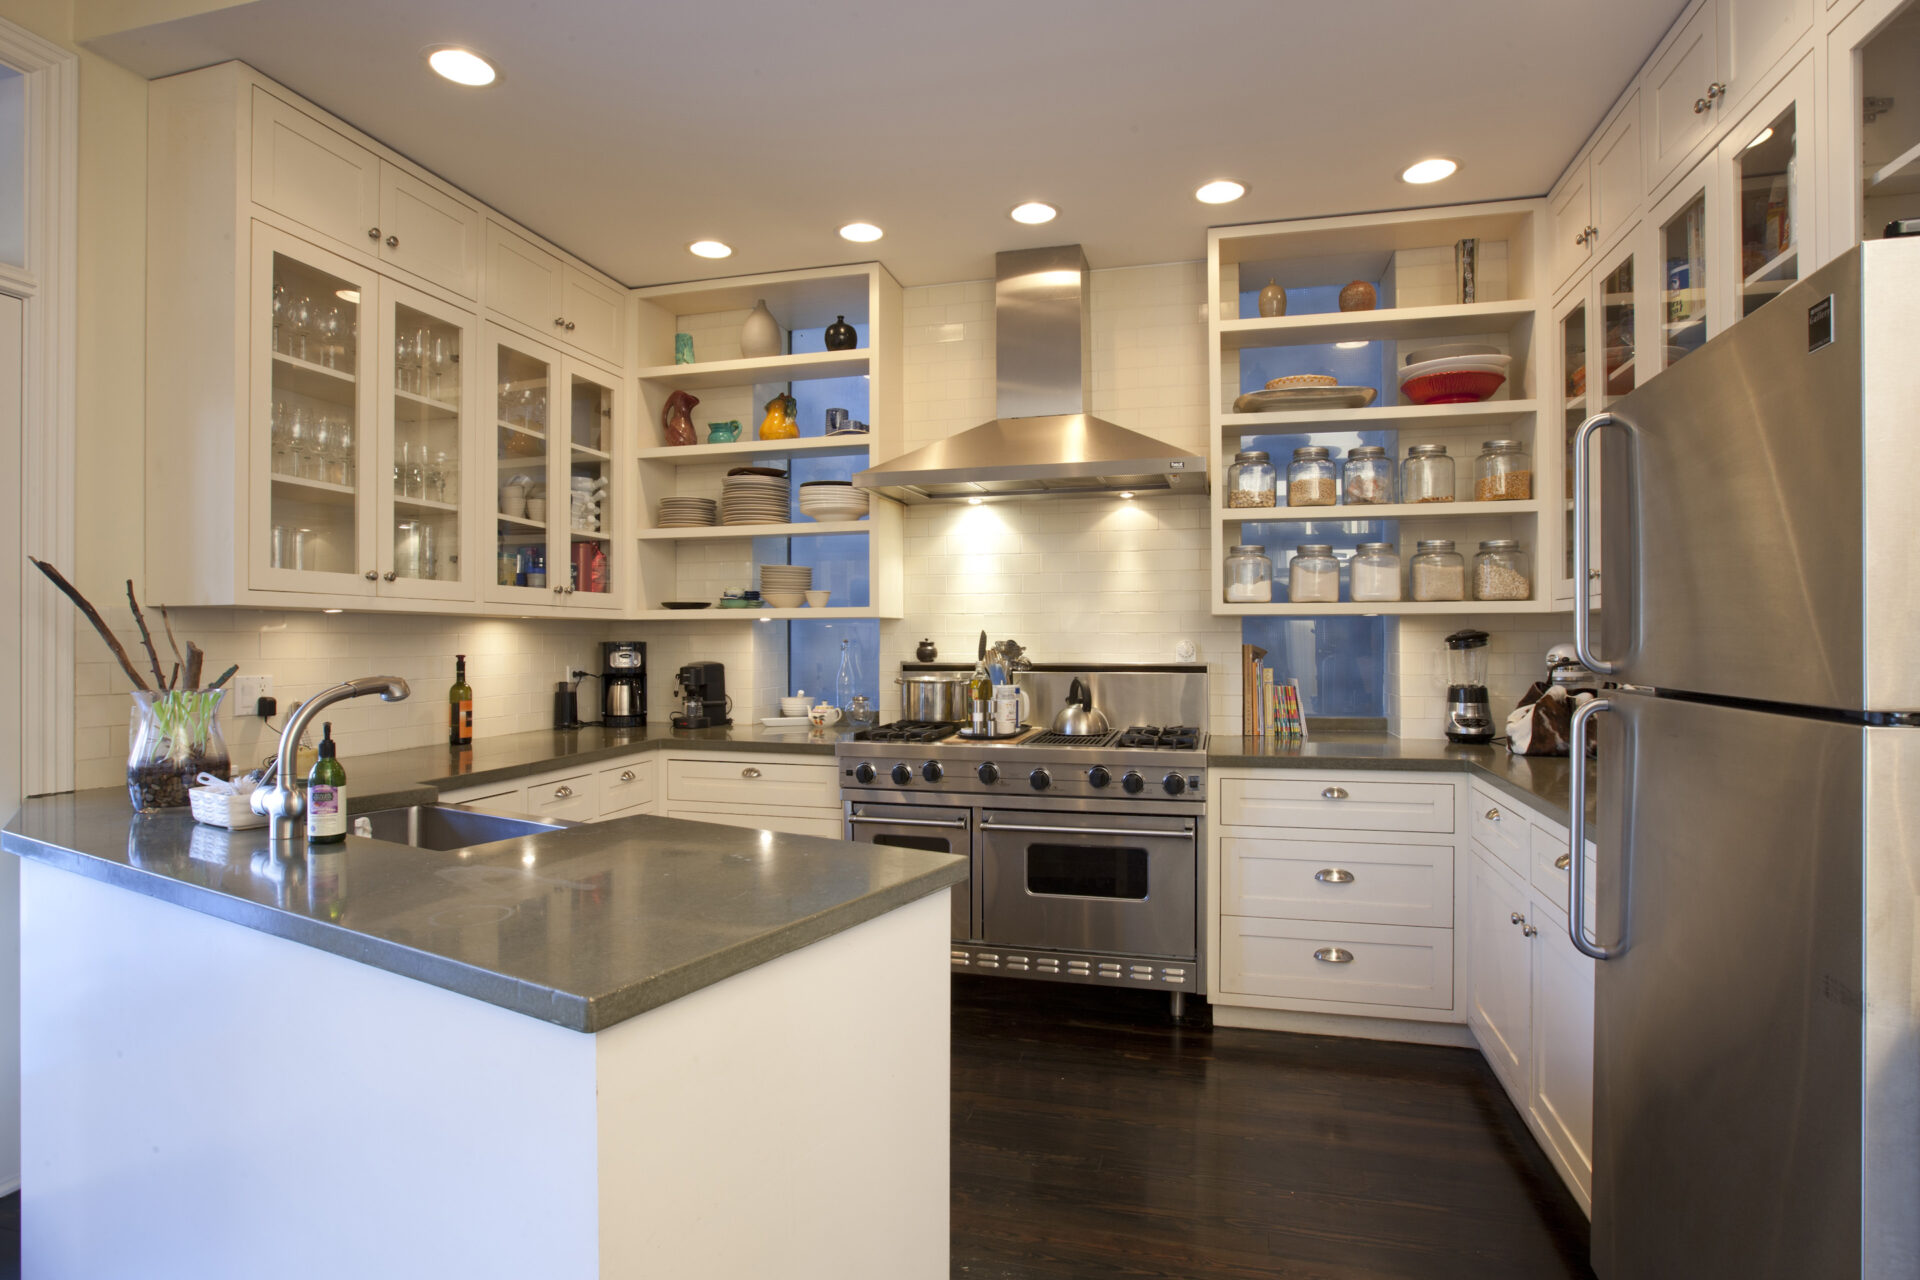 modern kitchen space with complete furniture, fixtures, appliances